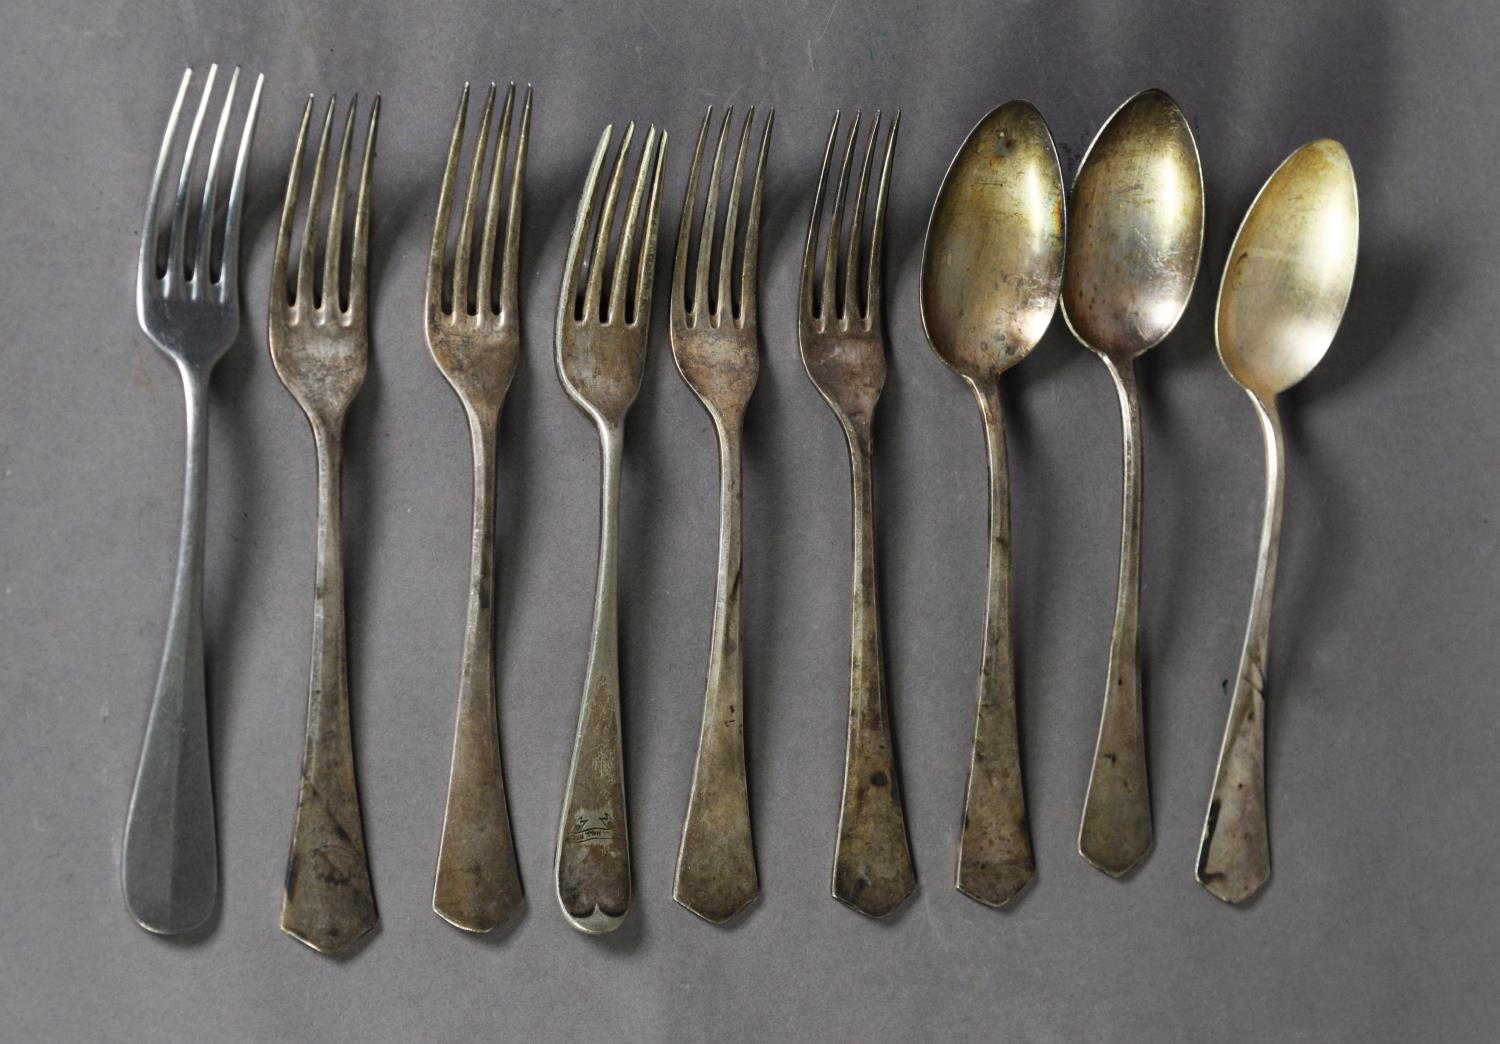 AN INTERESTING COLLECTION OF THIRD REICH ASSOCIATED TABLE FLATWARE: to include three forks and one